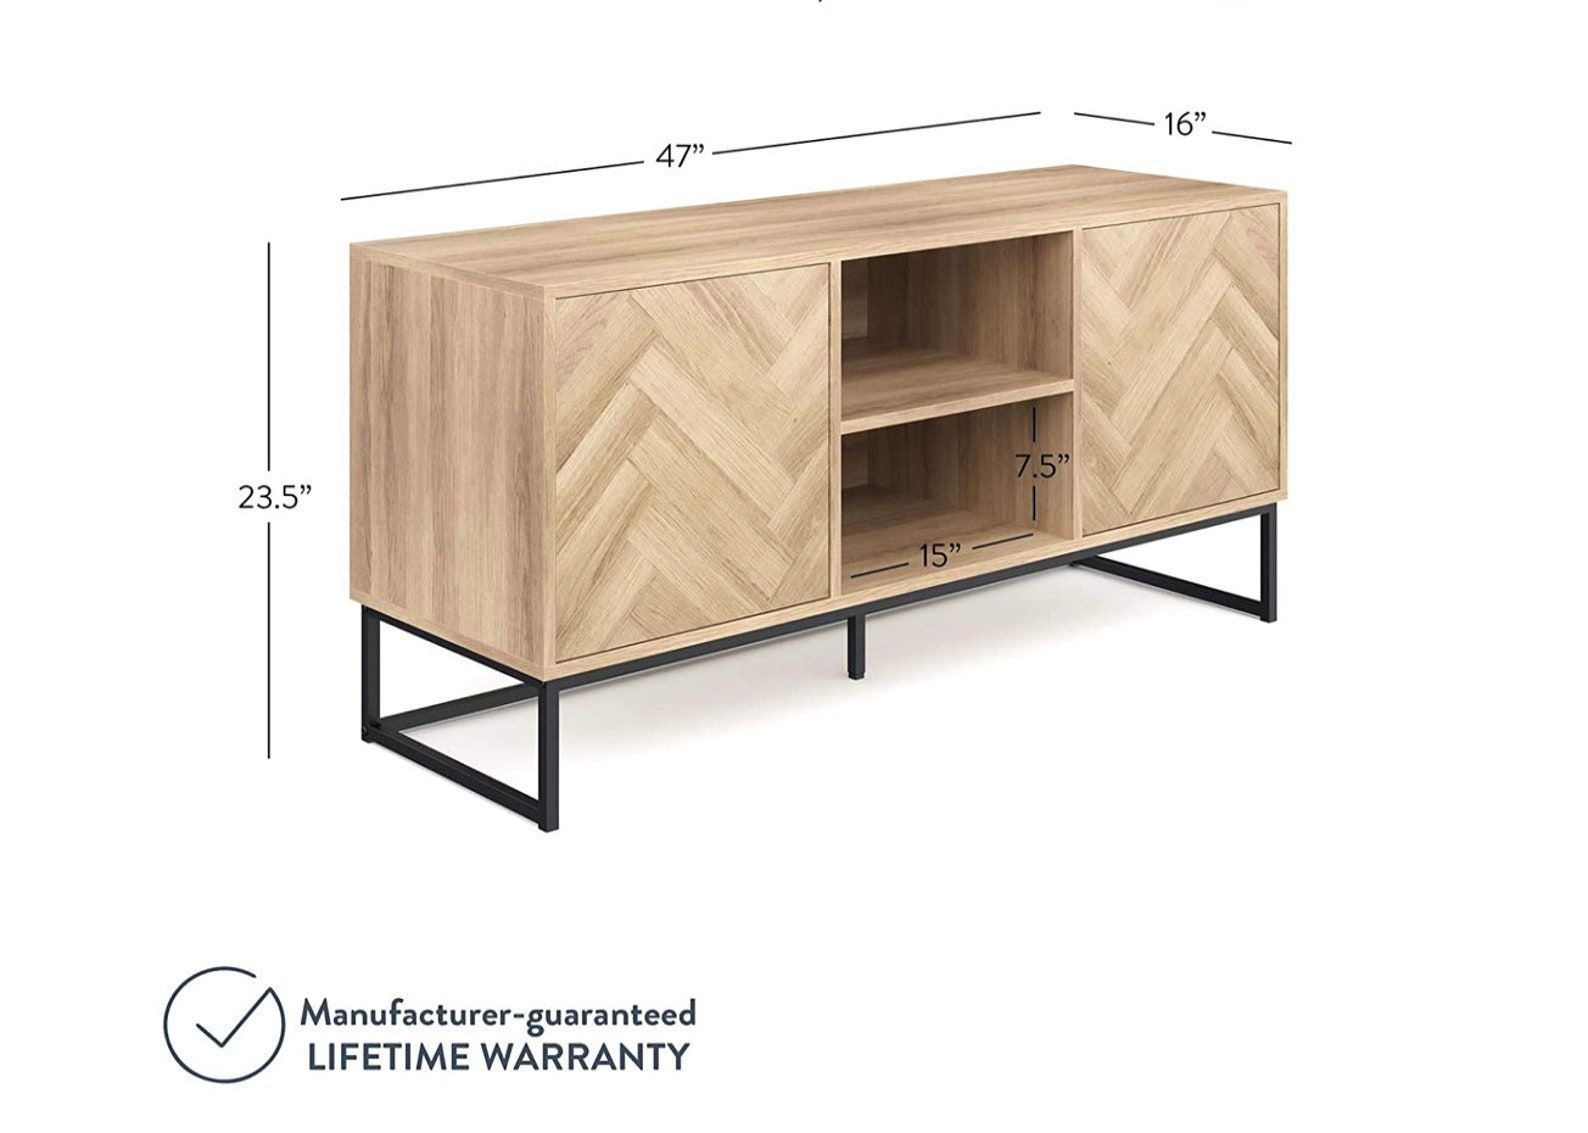 Console Cabinet Or Tv Stand With Doors For Hidden Storage Throughout Media Console Cabinet Tv Stands With Hidden Storage Herringbone Pattern Wood Metal (View 11 of 15)